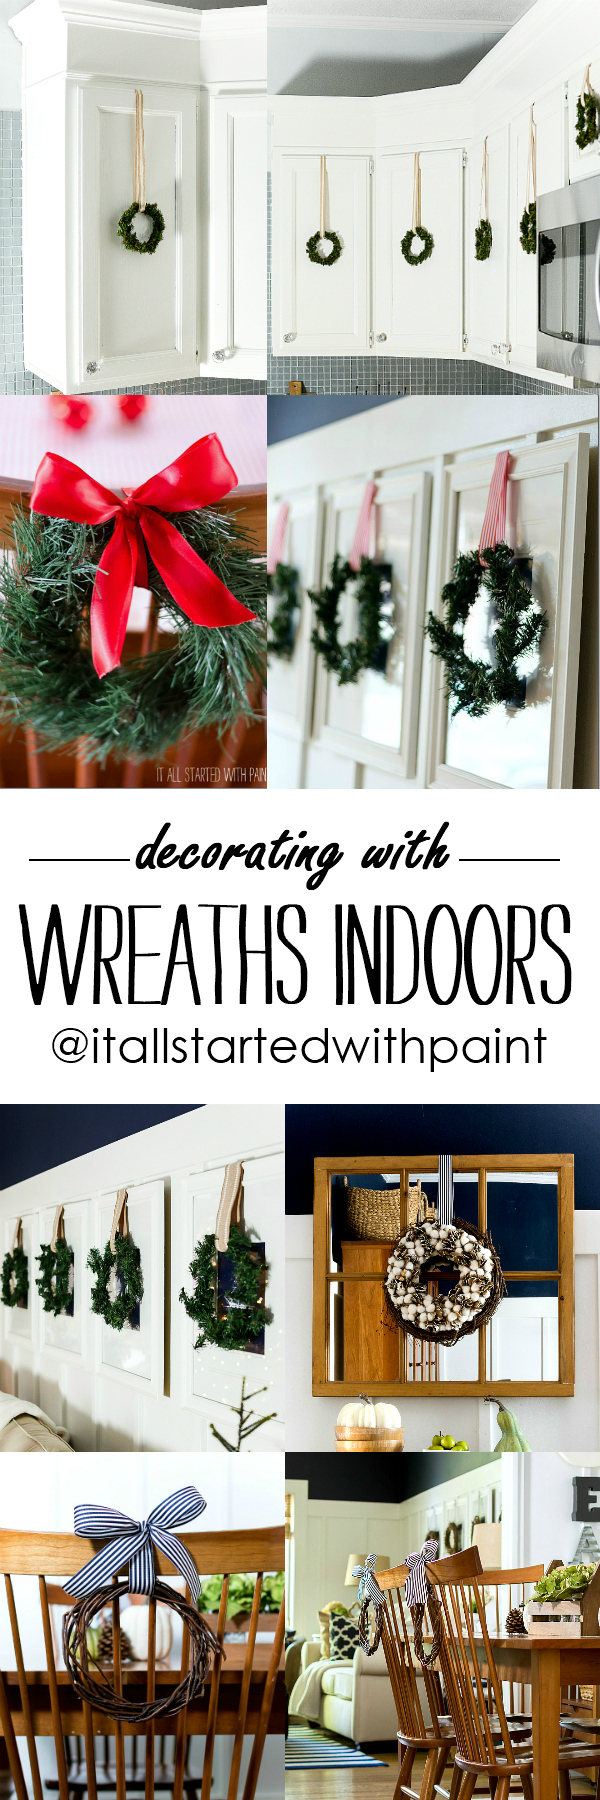 Decorating with Wreaths Indoors